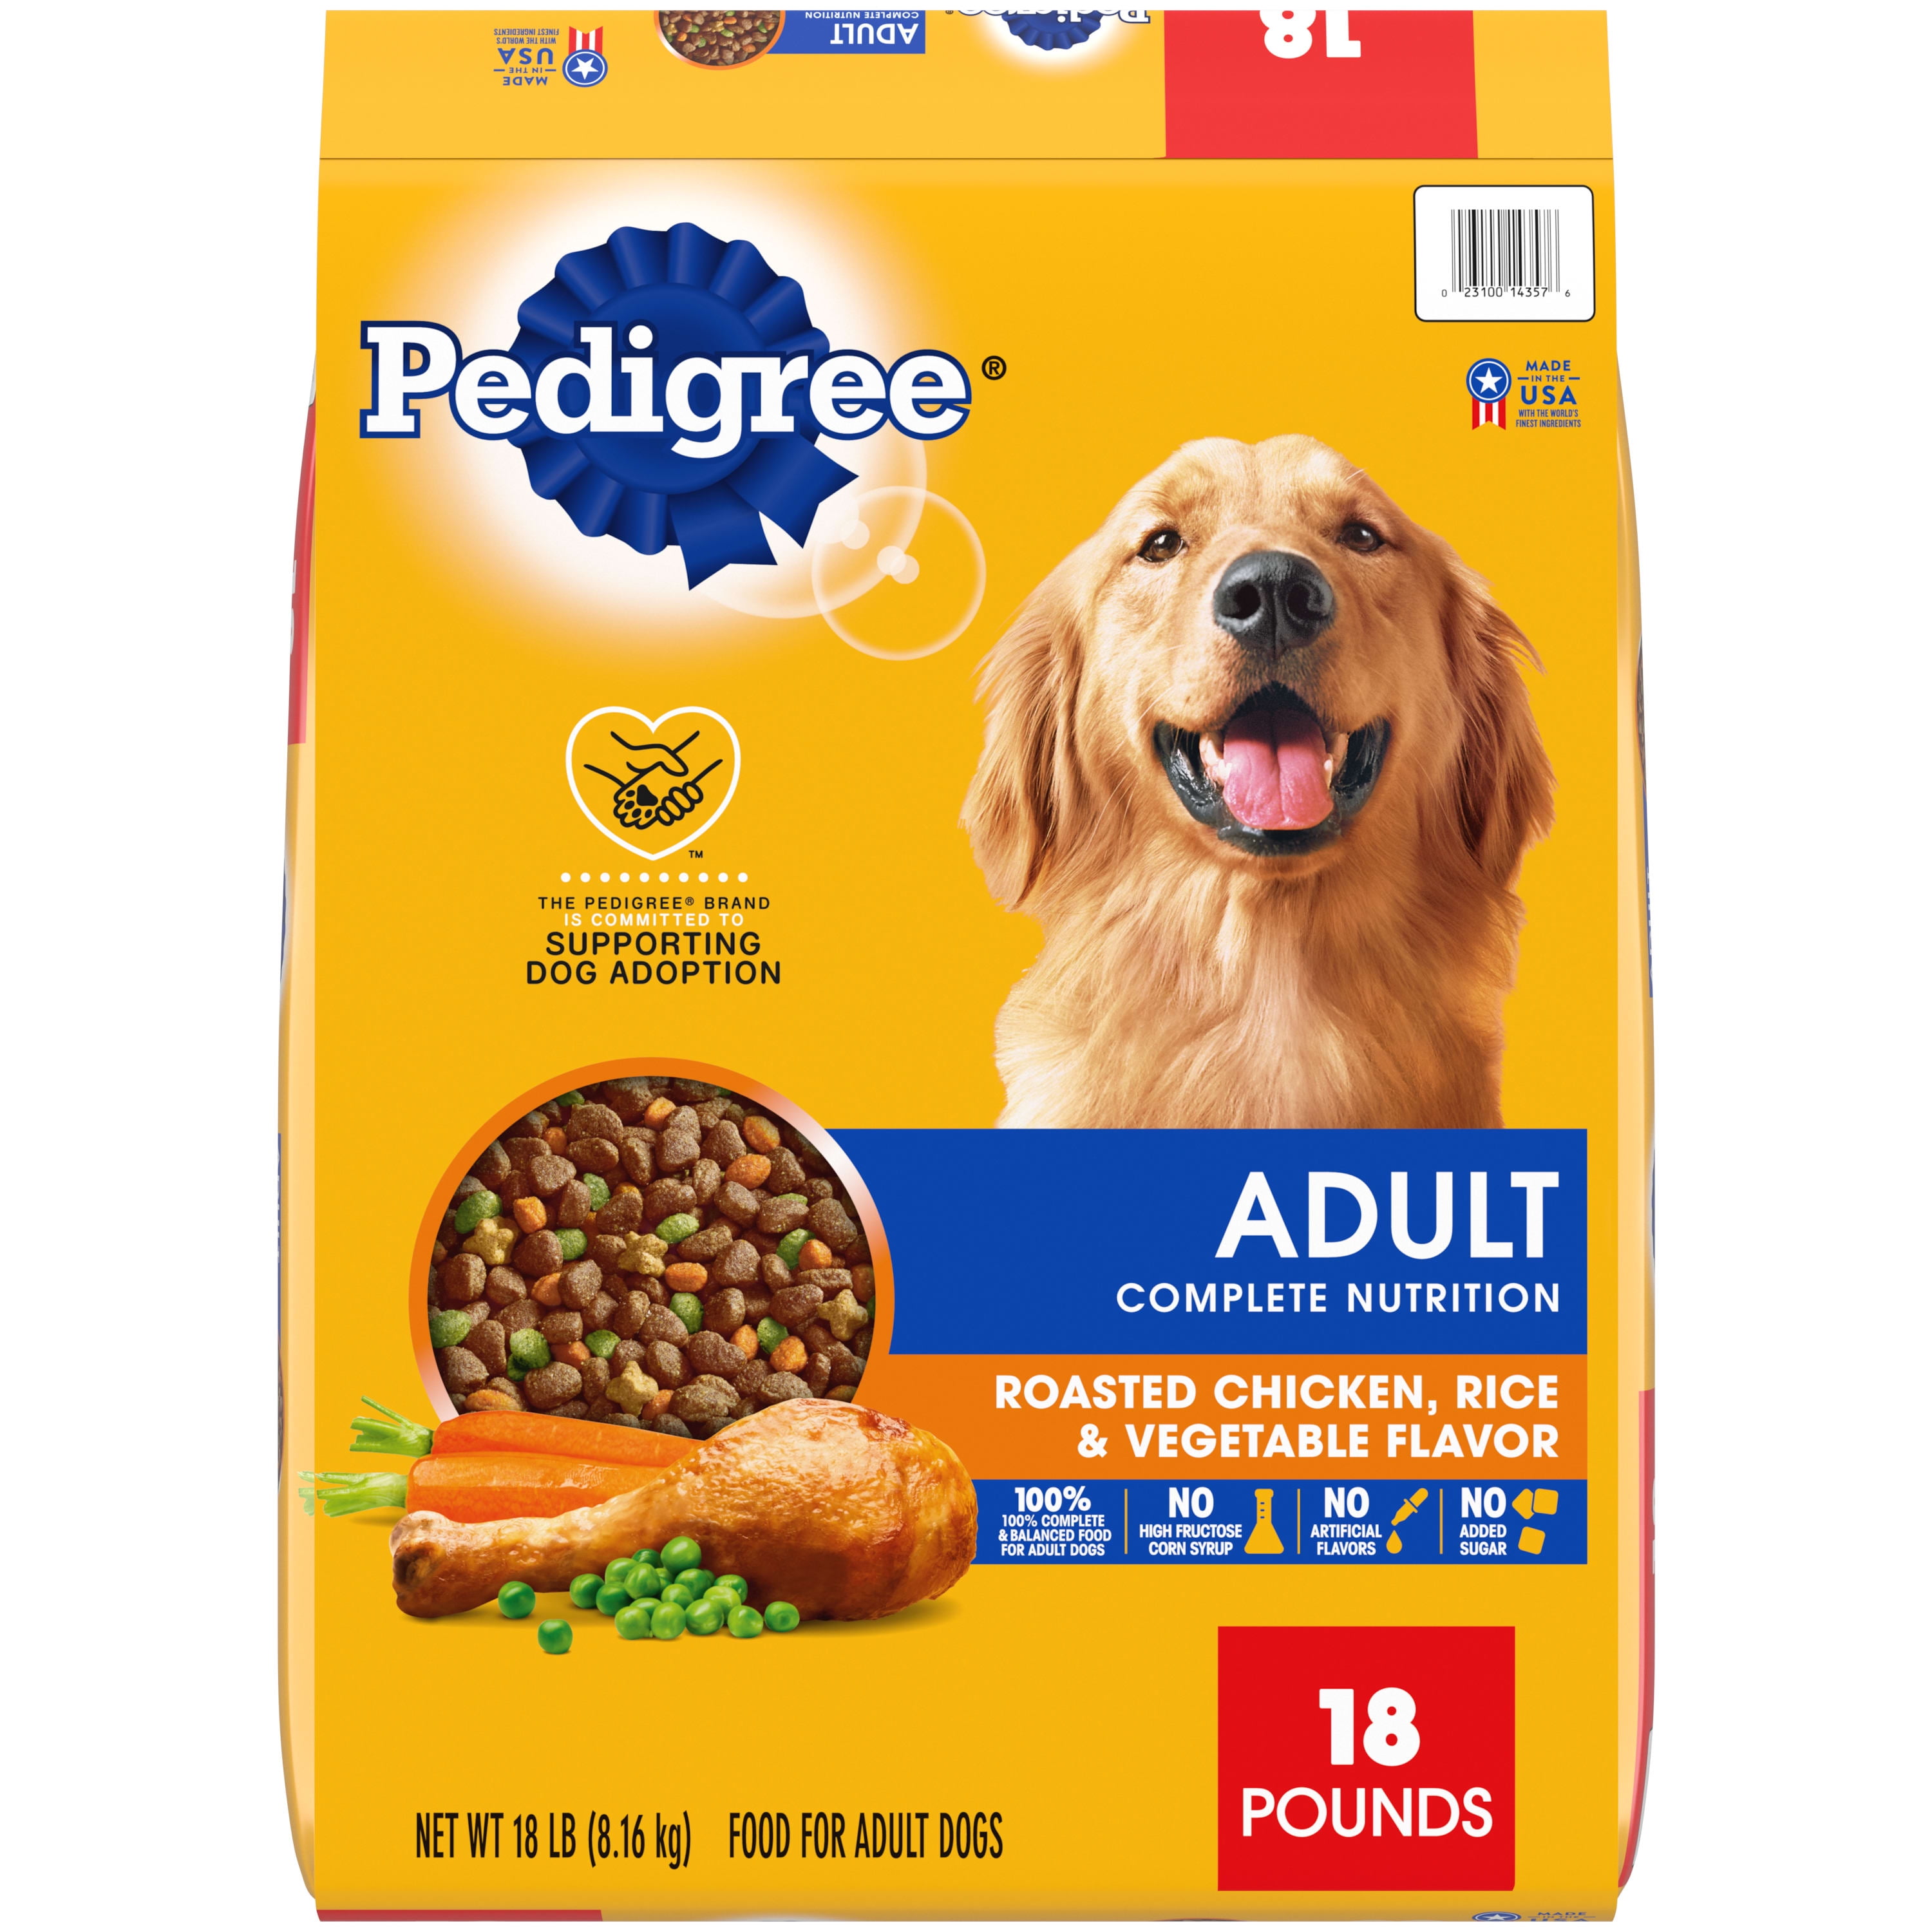 Concept for Life  Tailored Nutrition for Your Pet